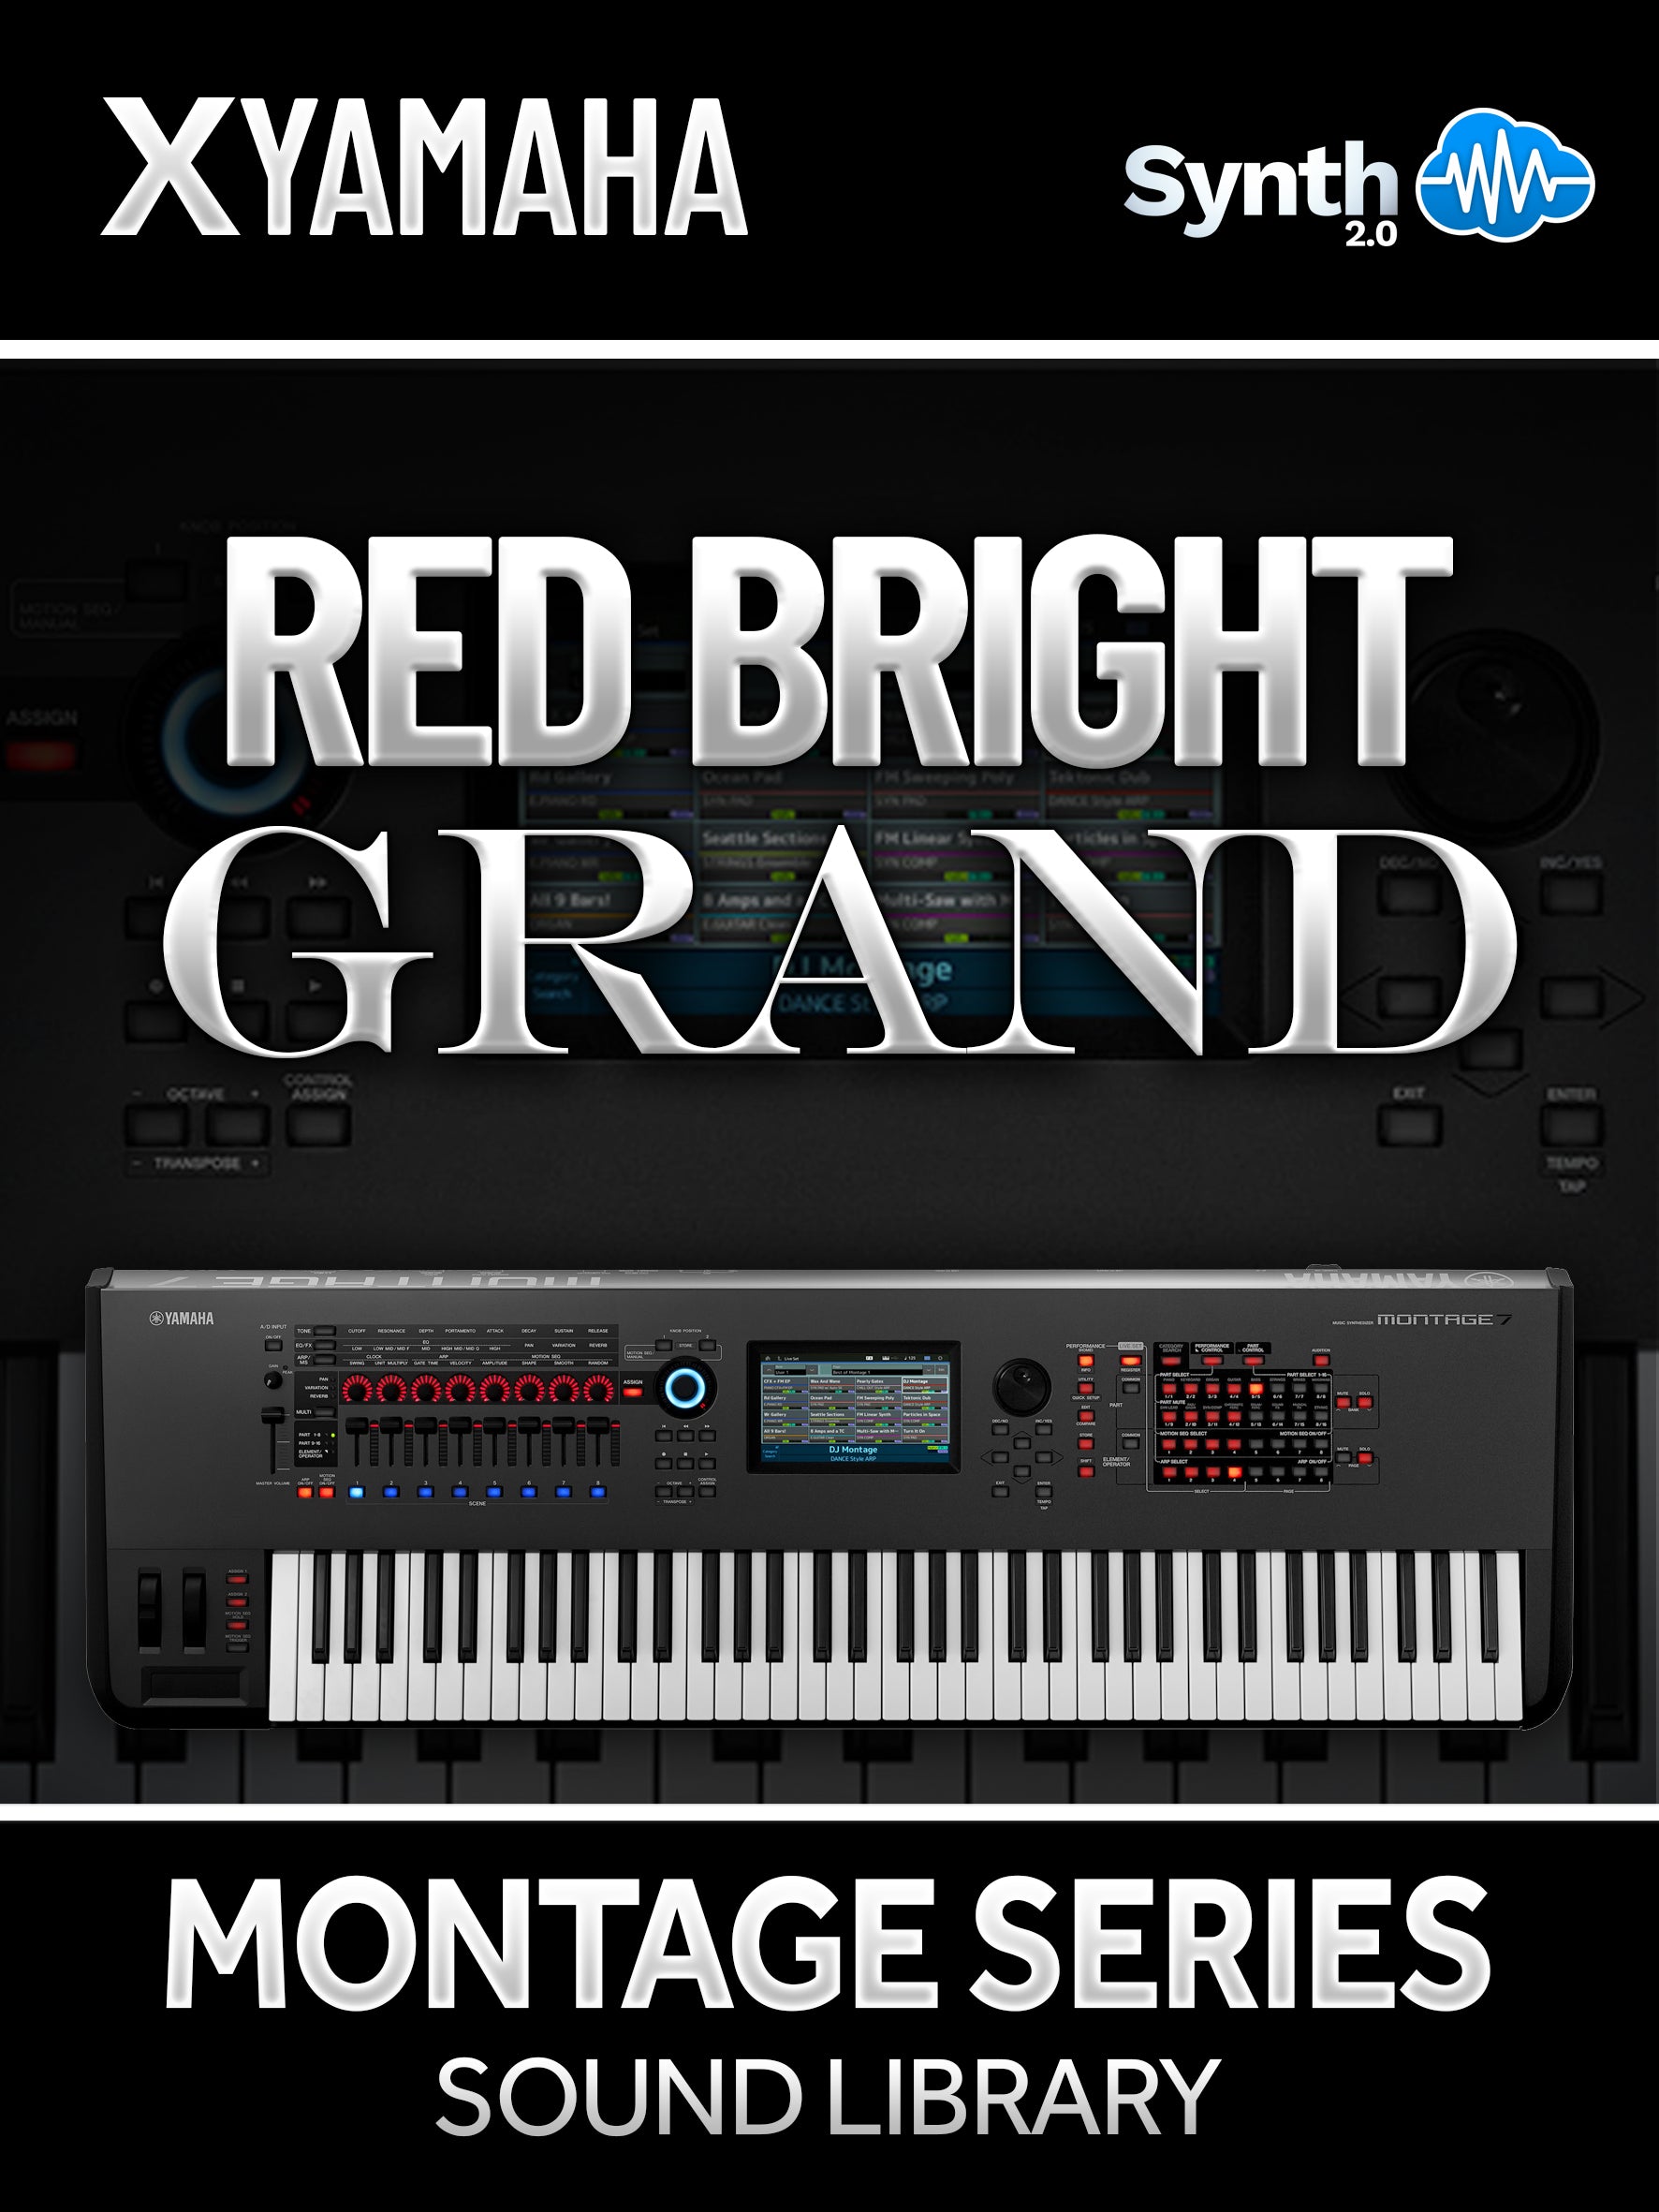 ITB001 - Red Bright Grand - Yamaha MONTAGE / M ( 4 presets )